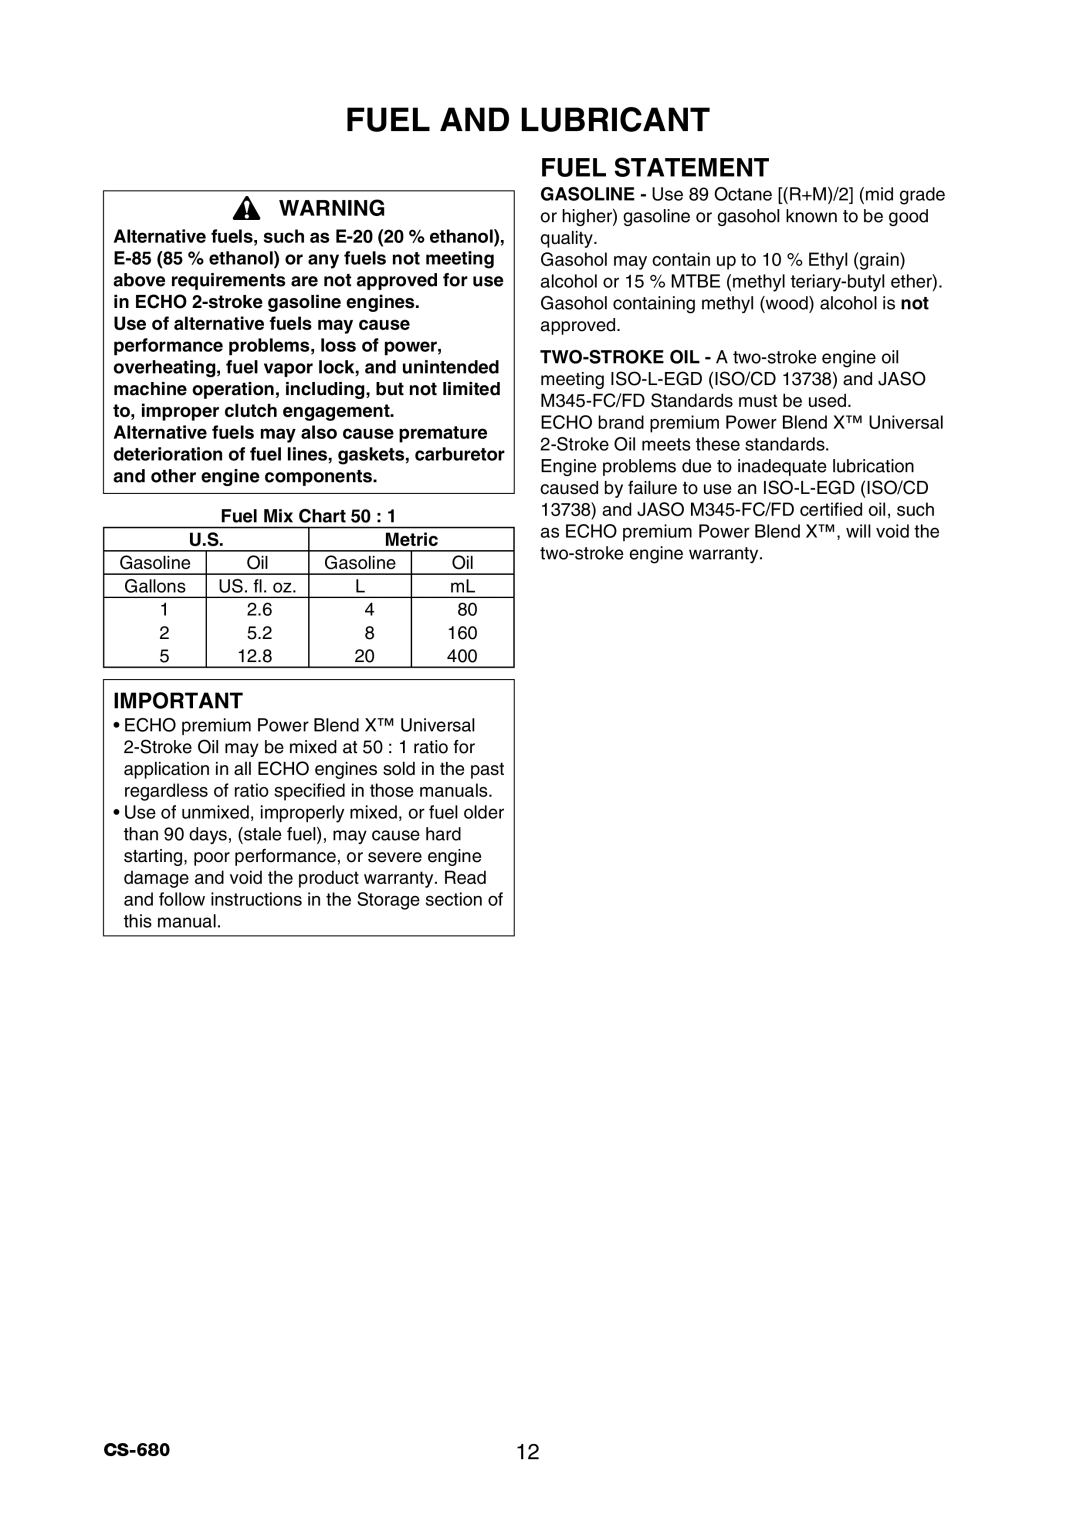 Echo CS-680 instruction manual Fuel And Lubricant, Fuel Statement, Fuel Mix Chart 50, Metric 